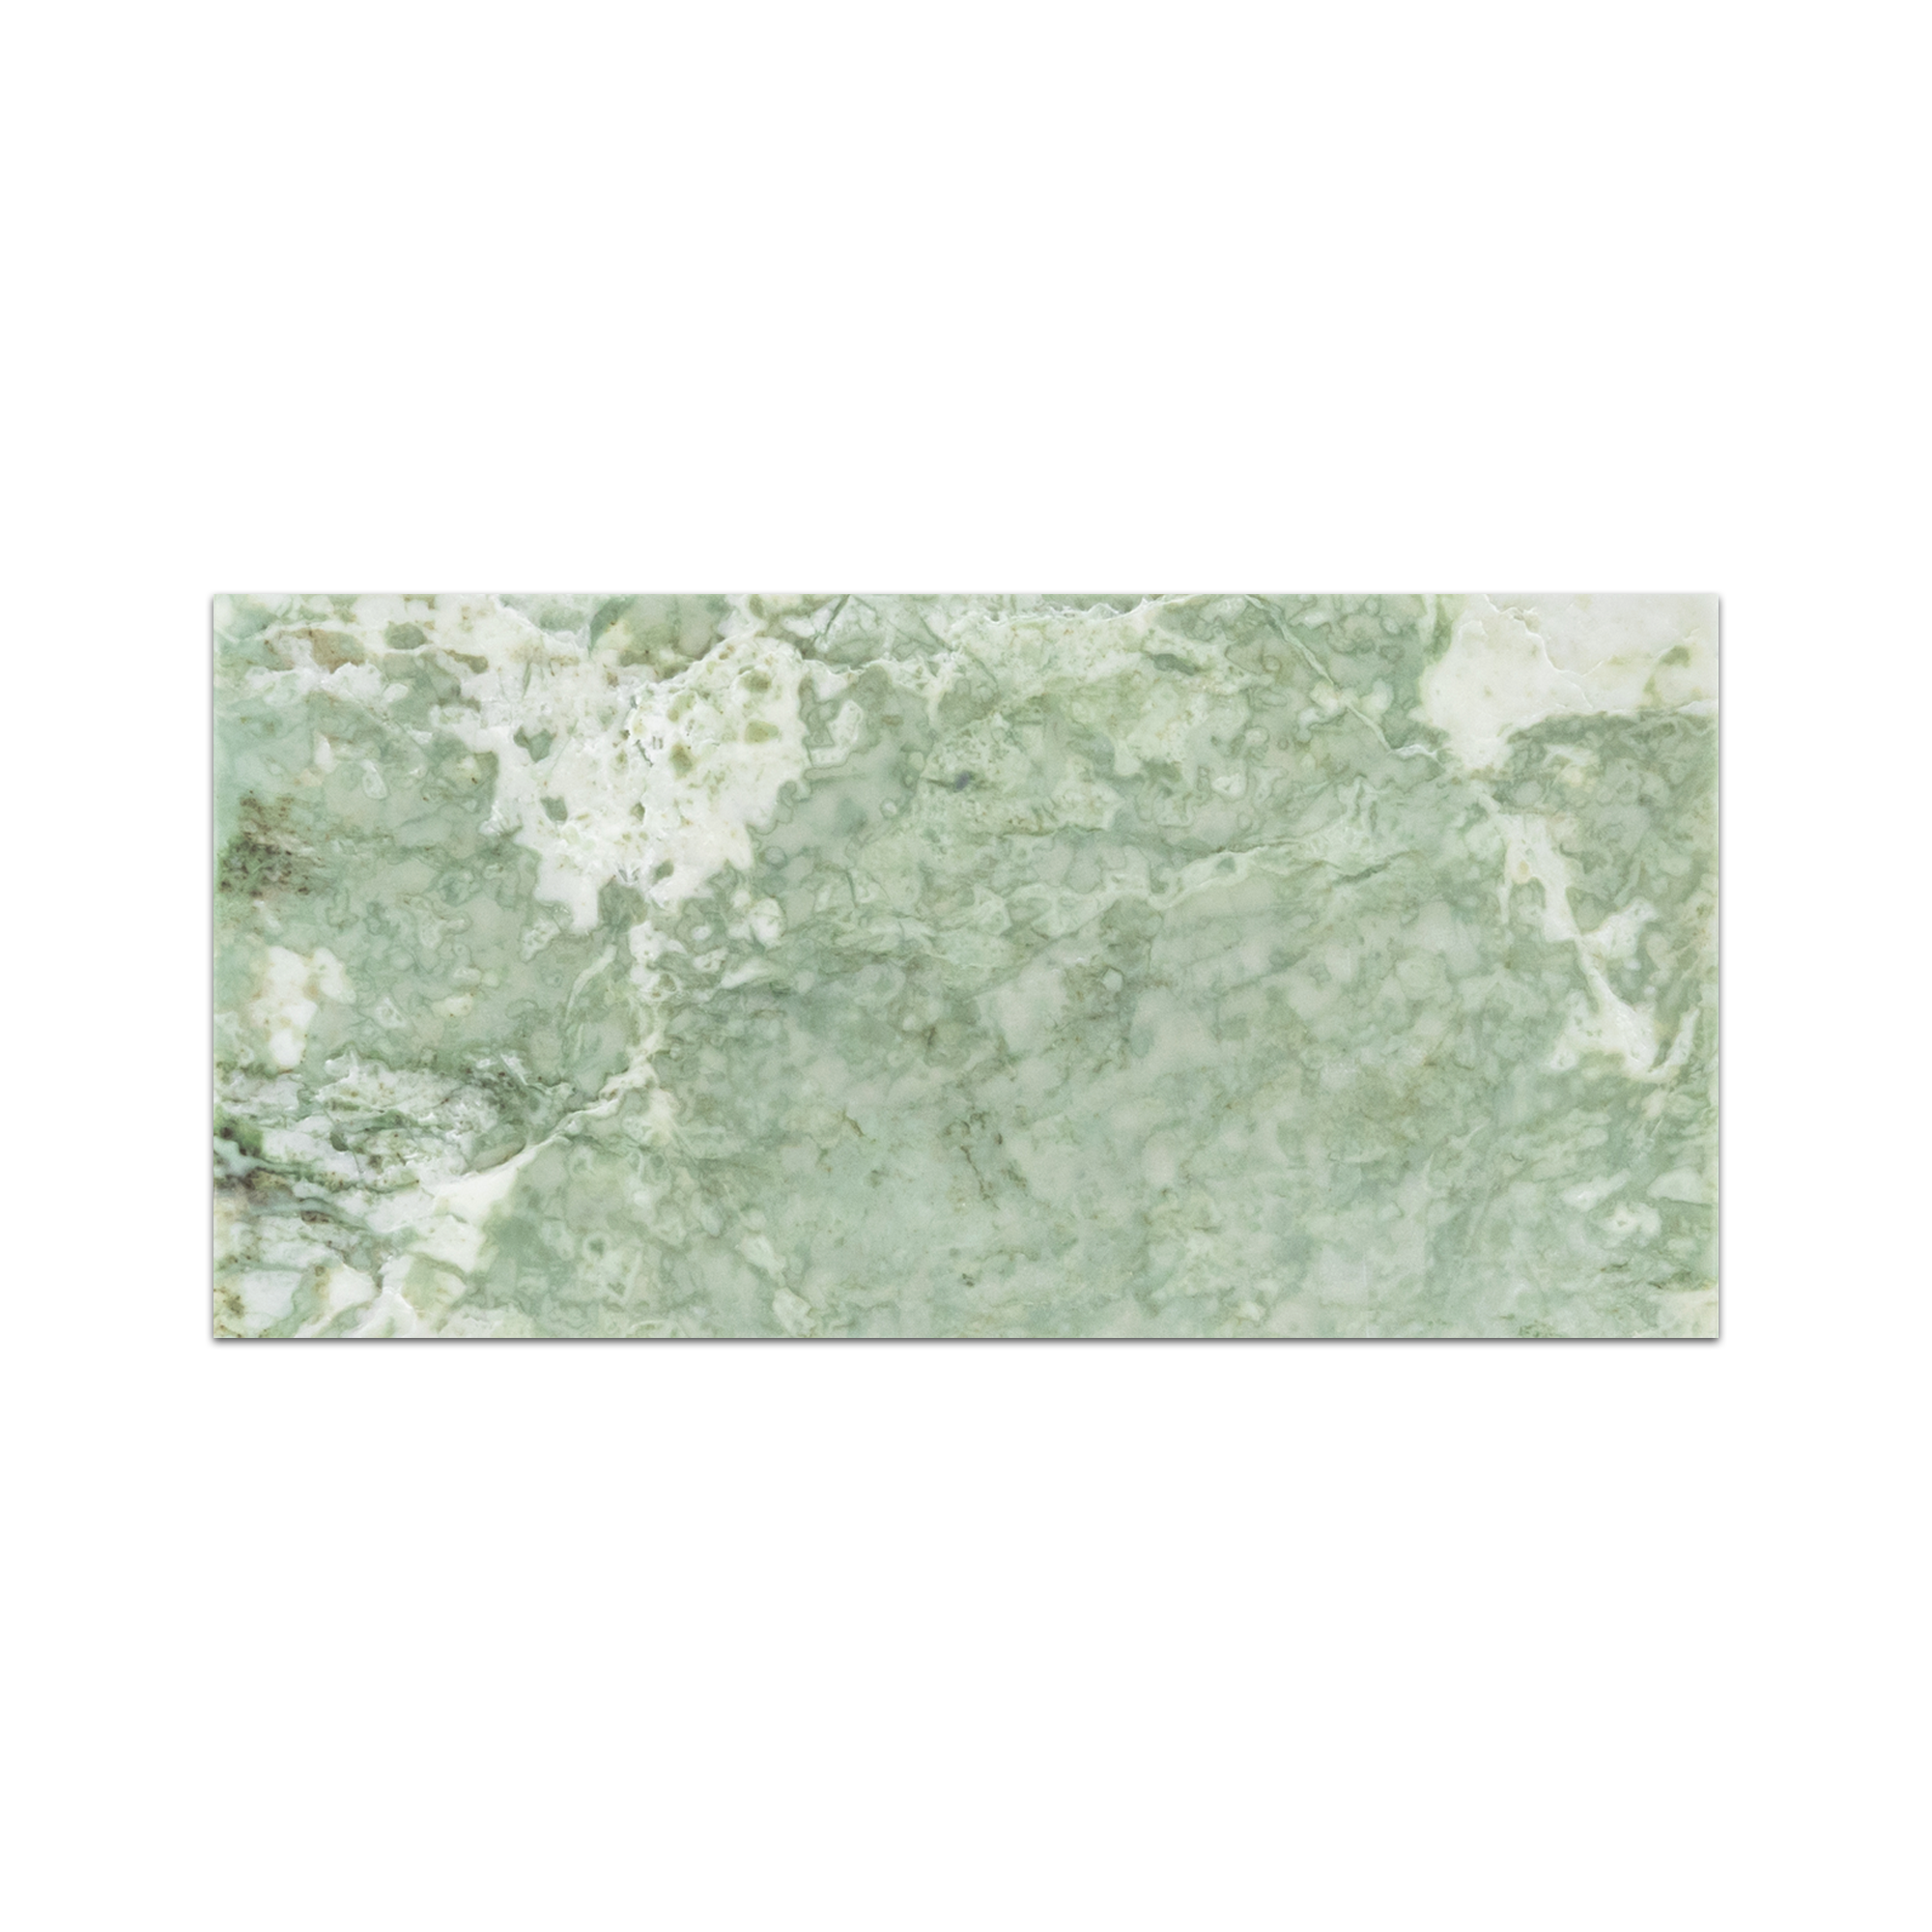 Elon emerald green marble rectangle field tile 6x12x0.375 honed AM6606H for sale at Surface Group Online tile store